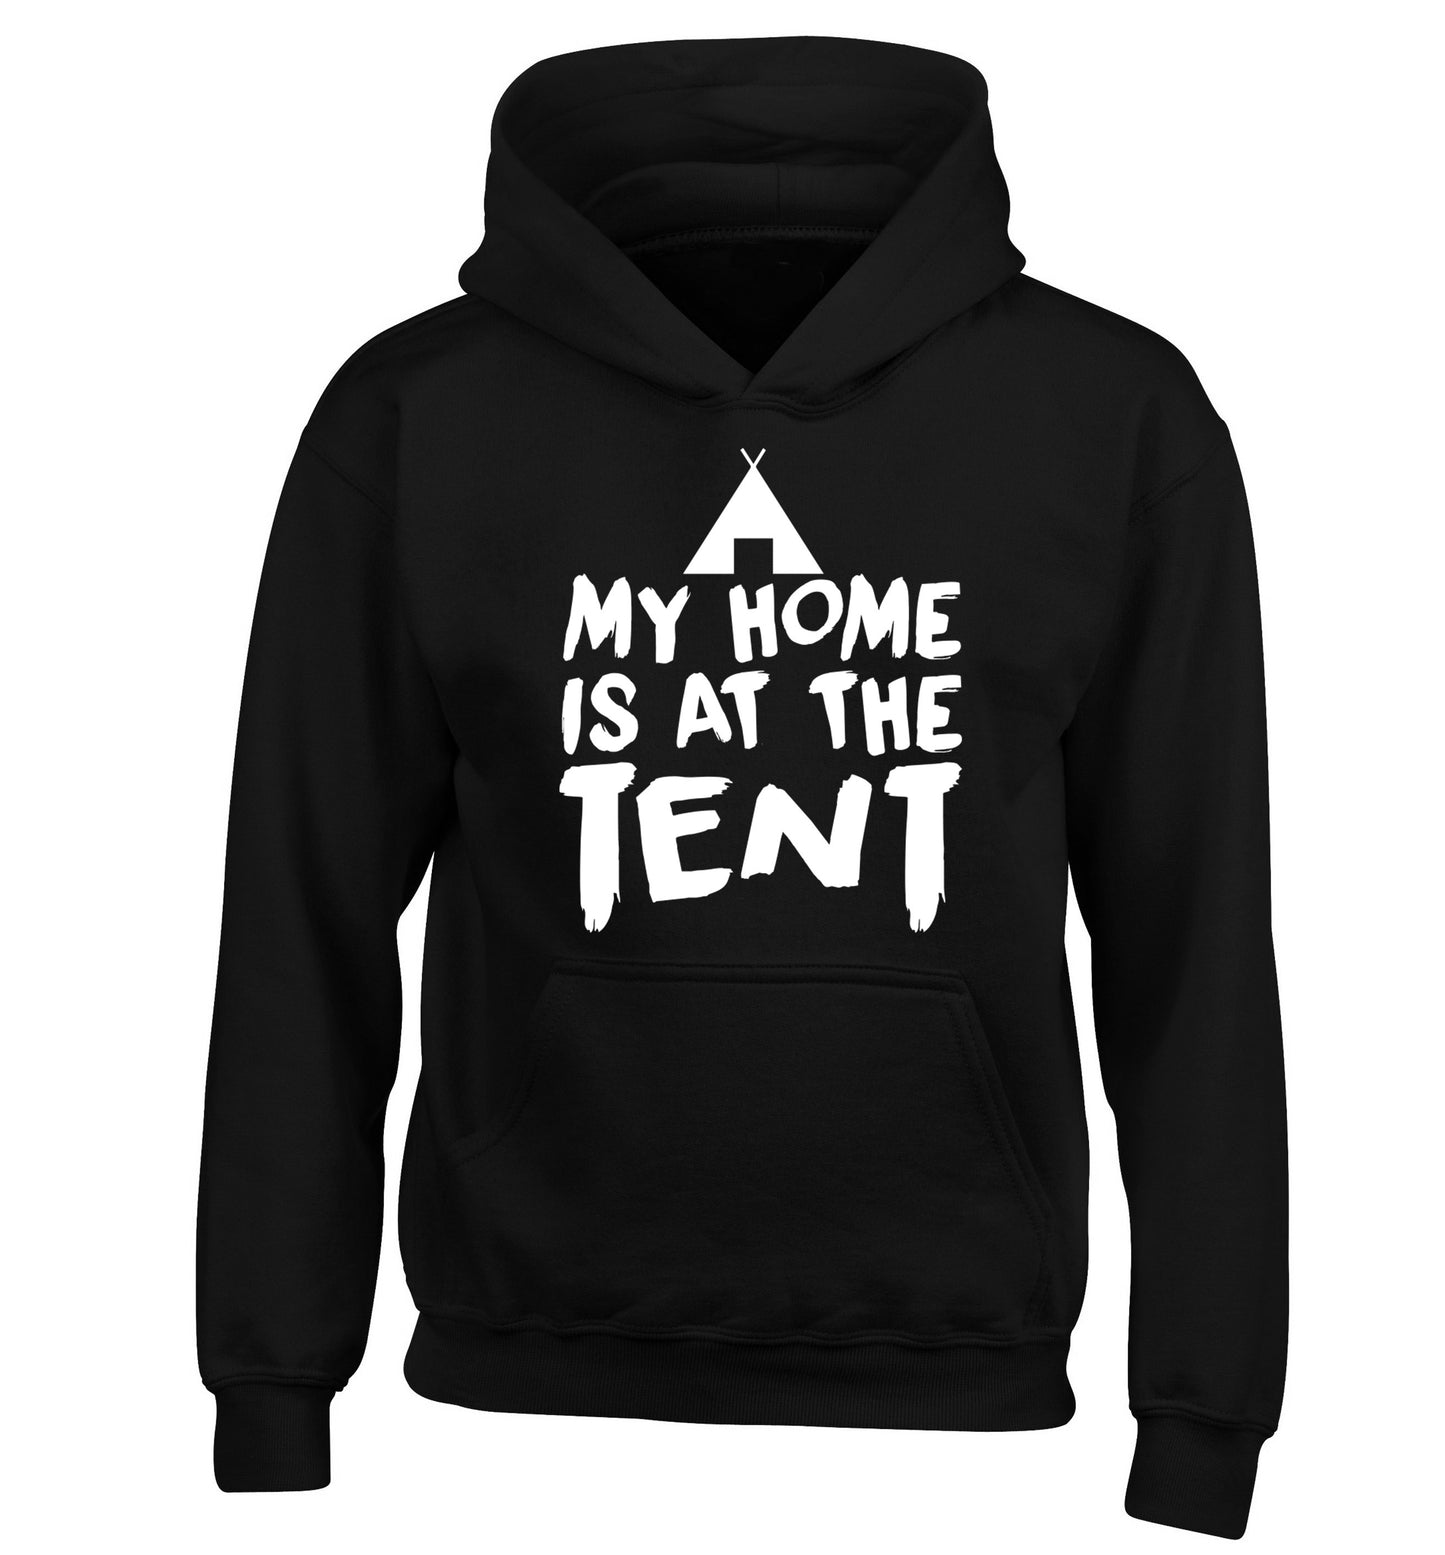 My home is at the tent children's black hoodie 12-14 Years